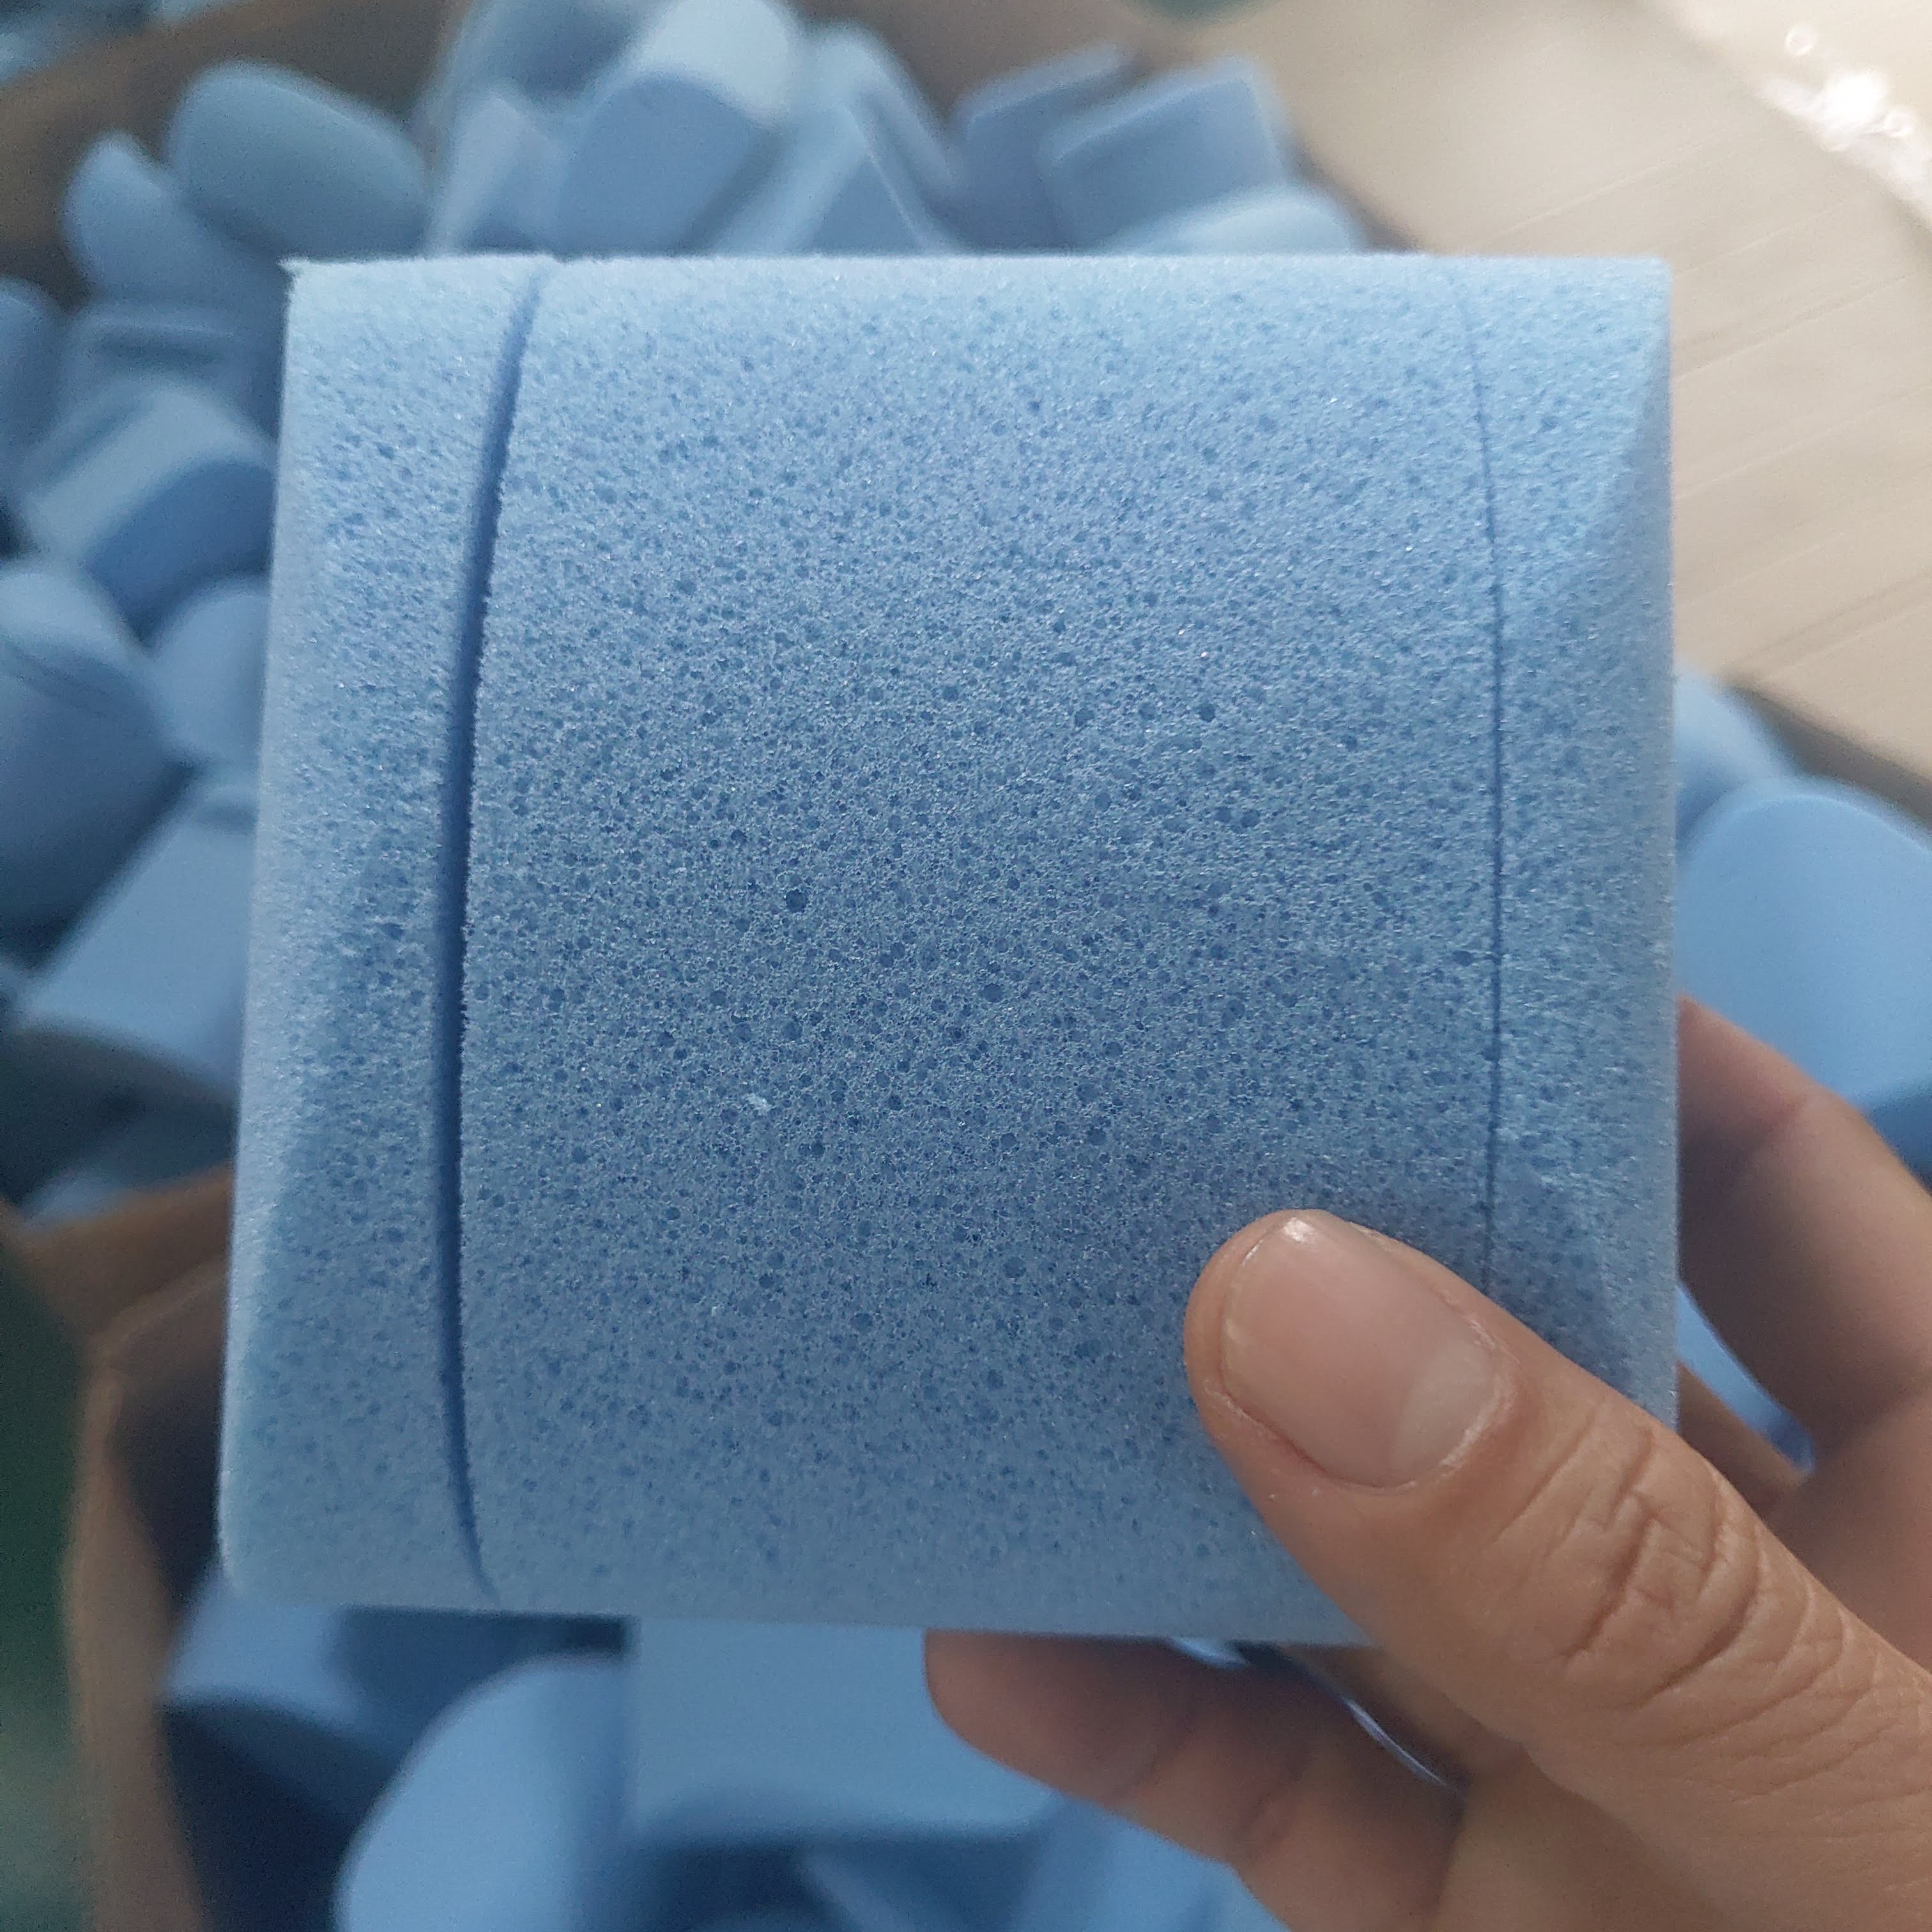 Polyurethane Foam Furniture Fast Delivery PU Foam Soft Products Material Resistant Shock Proof Shorten Production Time Vietnam 3